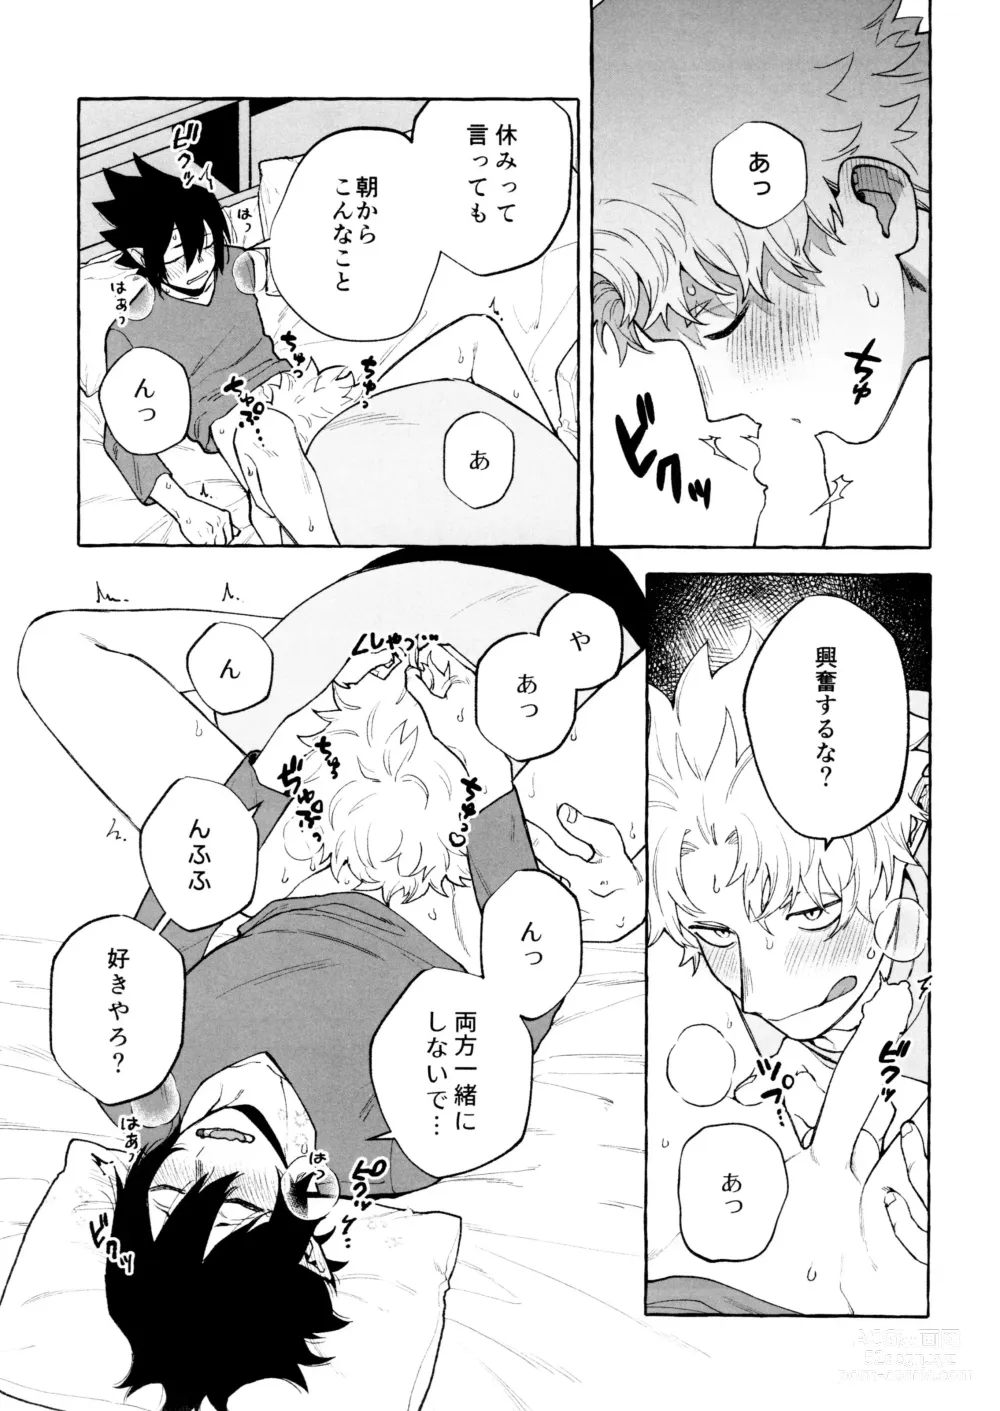 Page 9 of doujinshi Please please